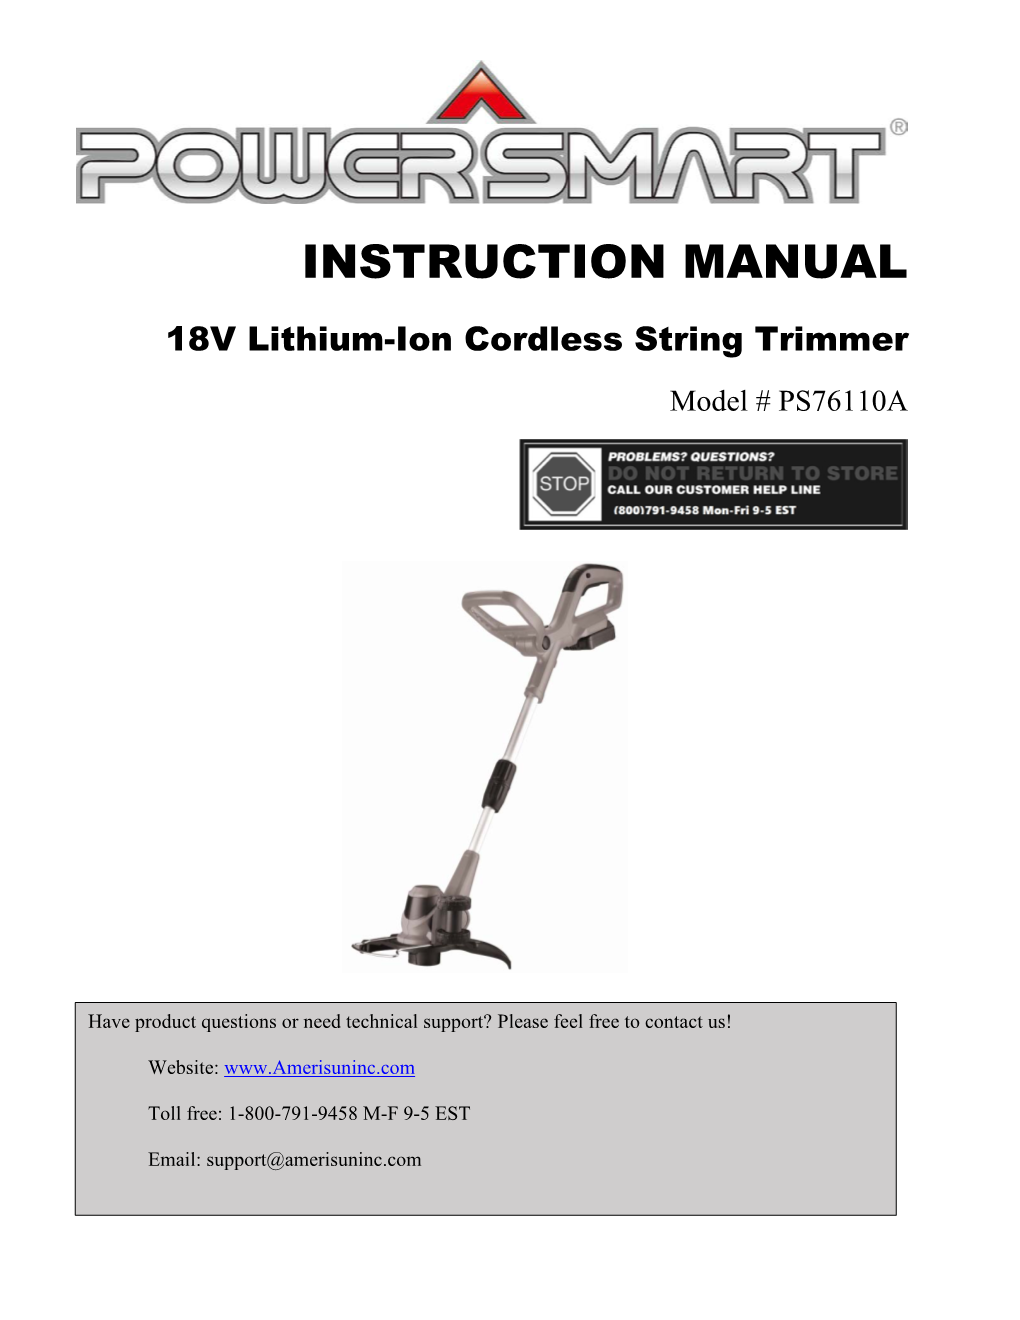 INSTRUCTION MANUAL 18V Lithium-Ion Cordless String Trimmer Model # PS76110A